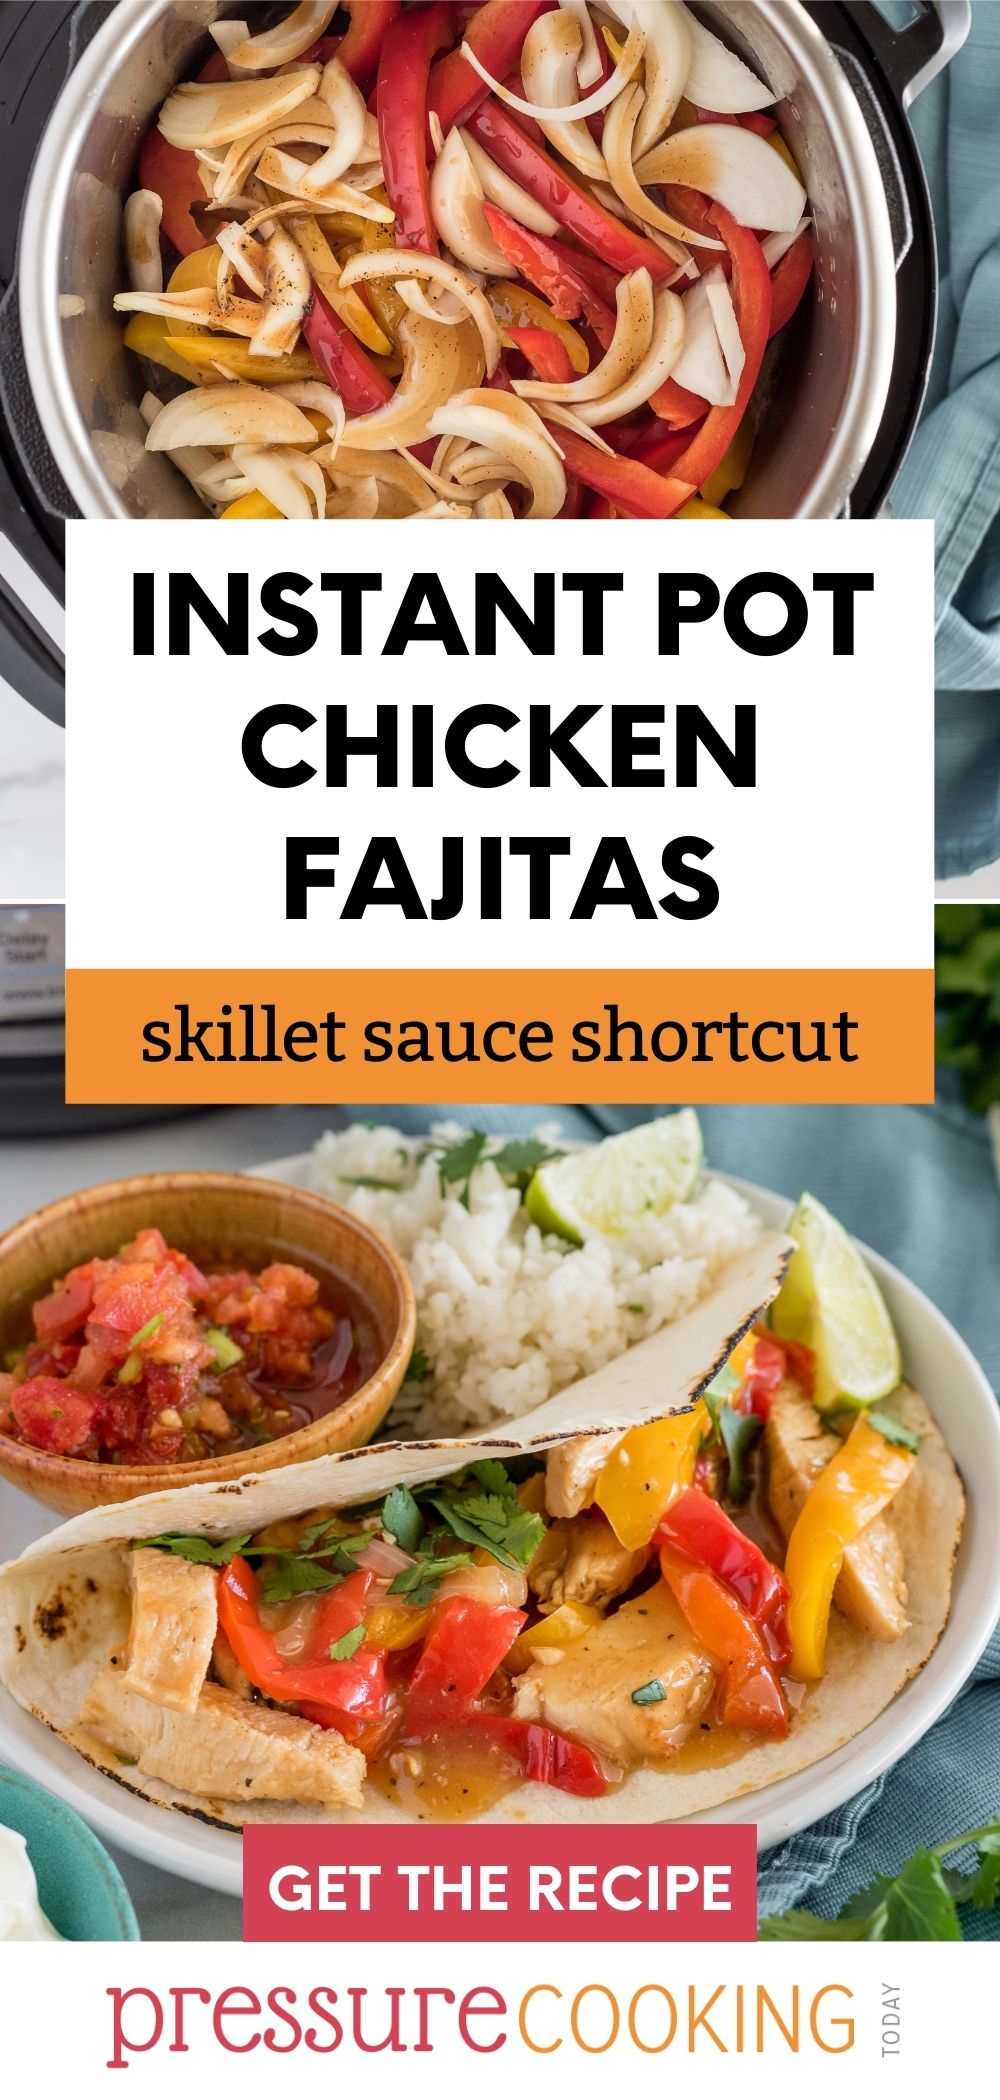 pinterest button that reads "Instant Pot chicken fajitas: skillet sauce shortcut" over two photos: the first of the onions and peppers in the Instant Pot and the second of a finished, prepared fajita with cilantro rice and salsa in the background via @PressureCook2da